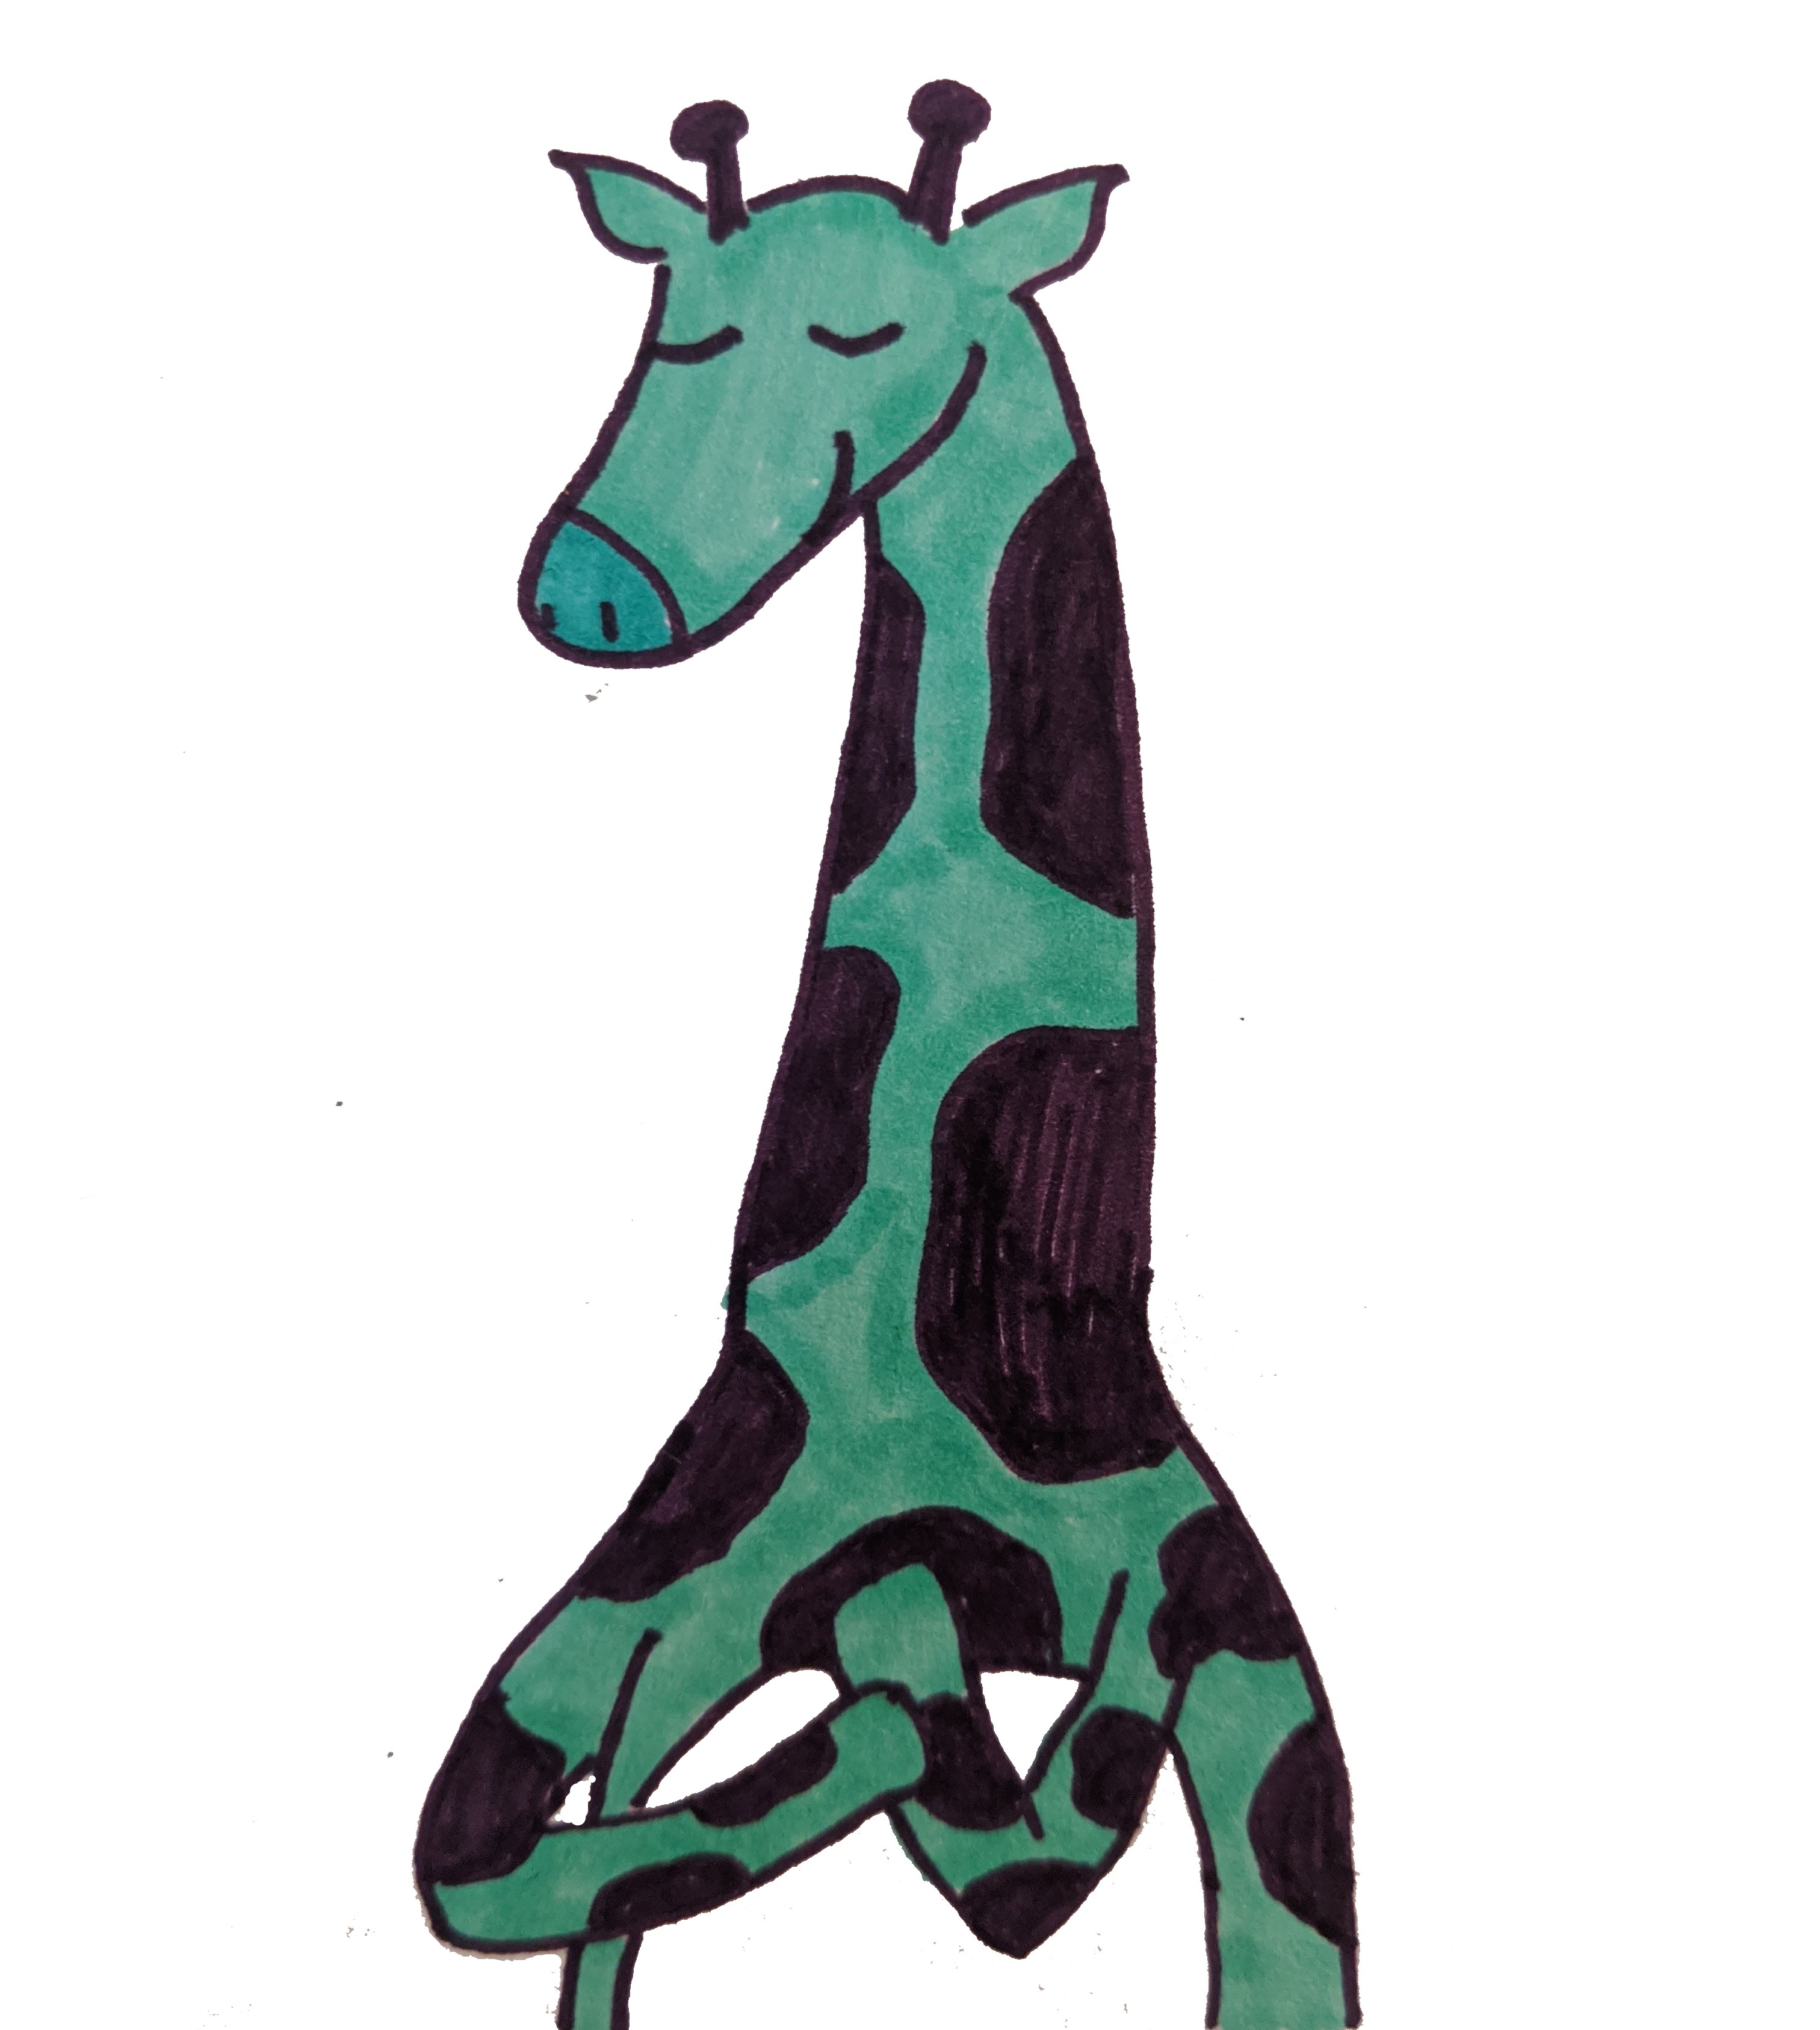 a turquoise giraffe caresses their arm with a smile on their face